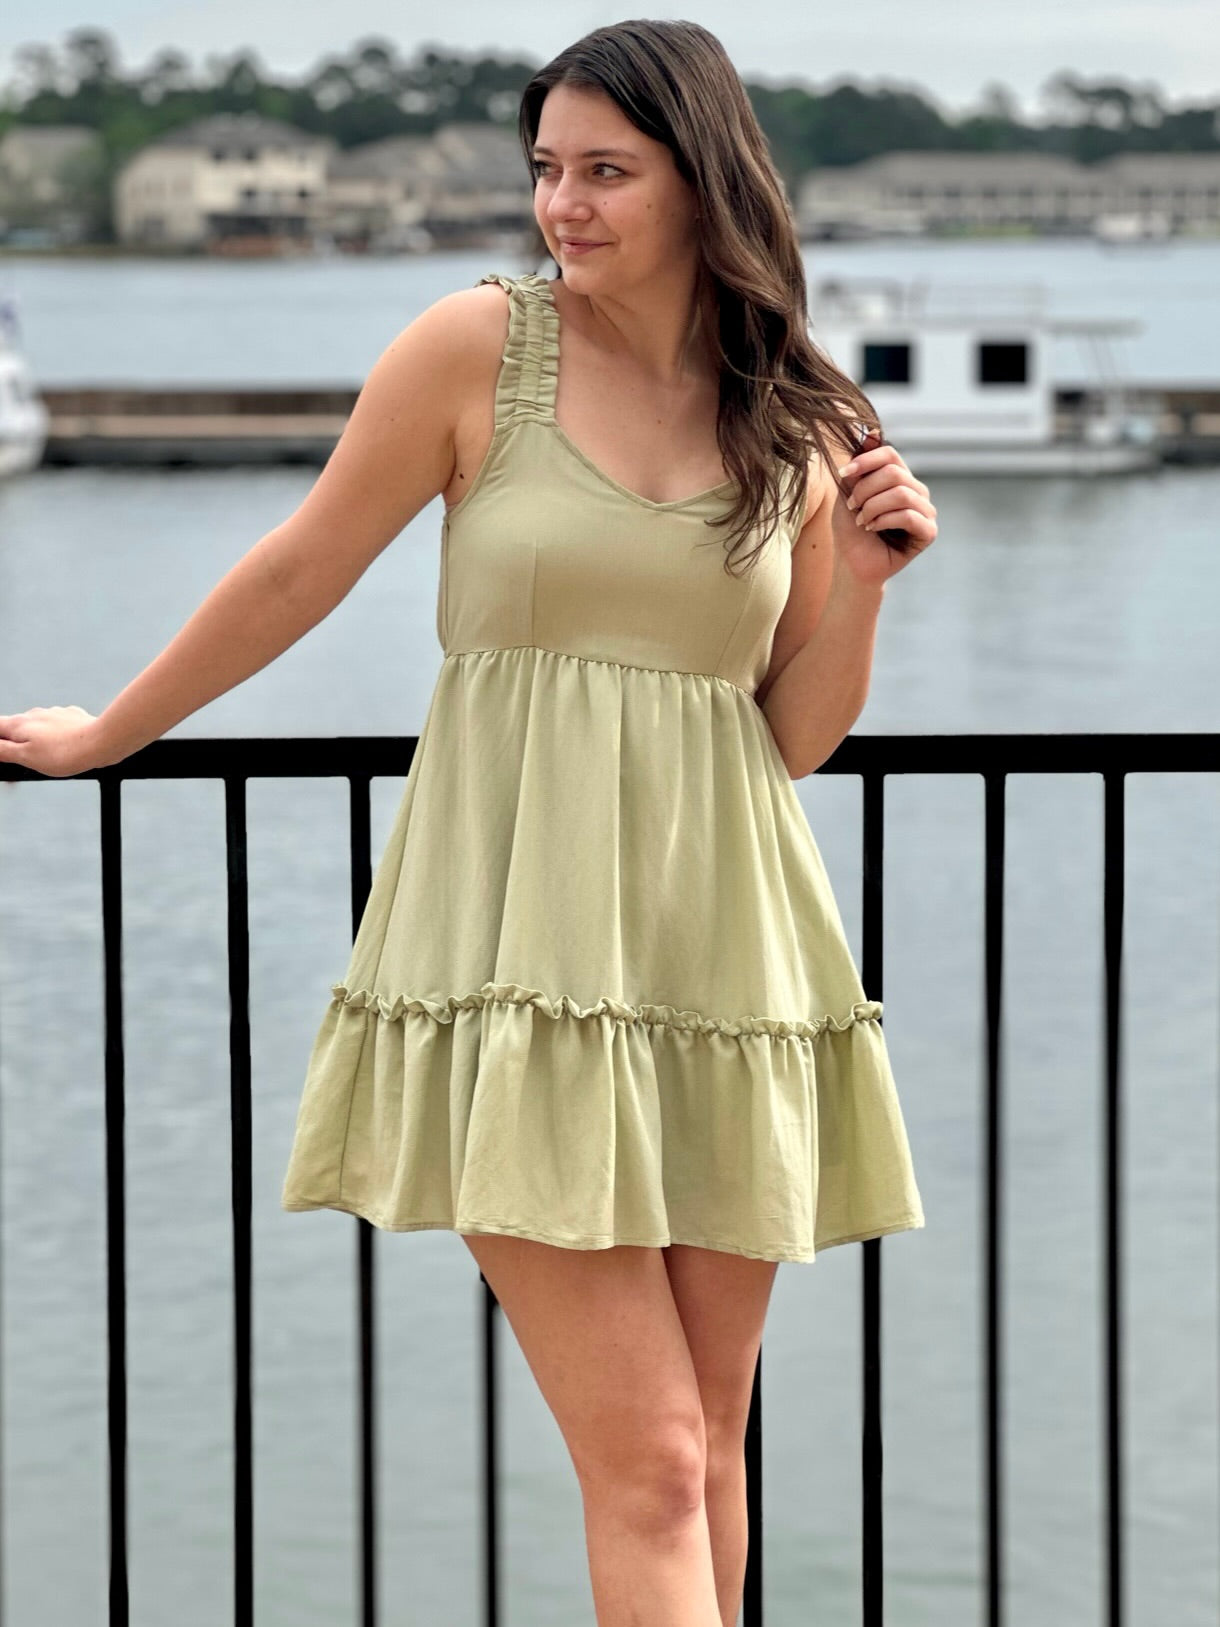 Megan in olive dress looking to the side